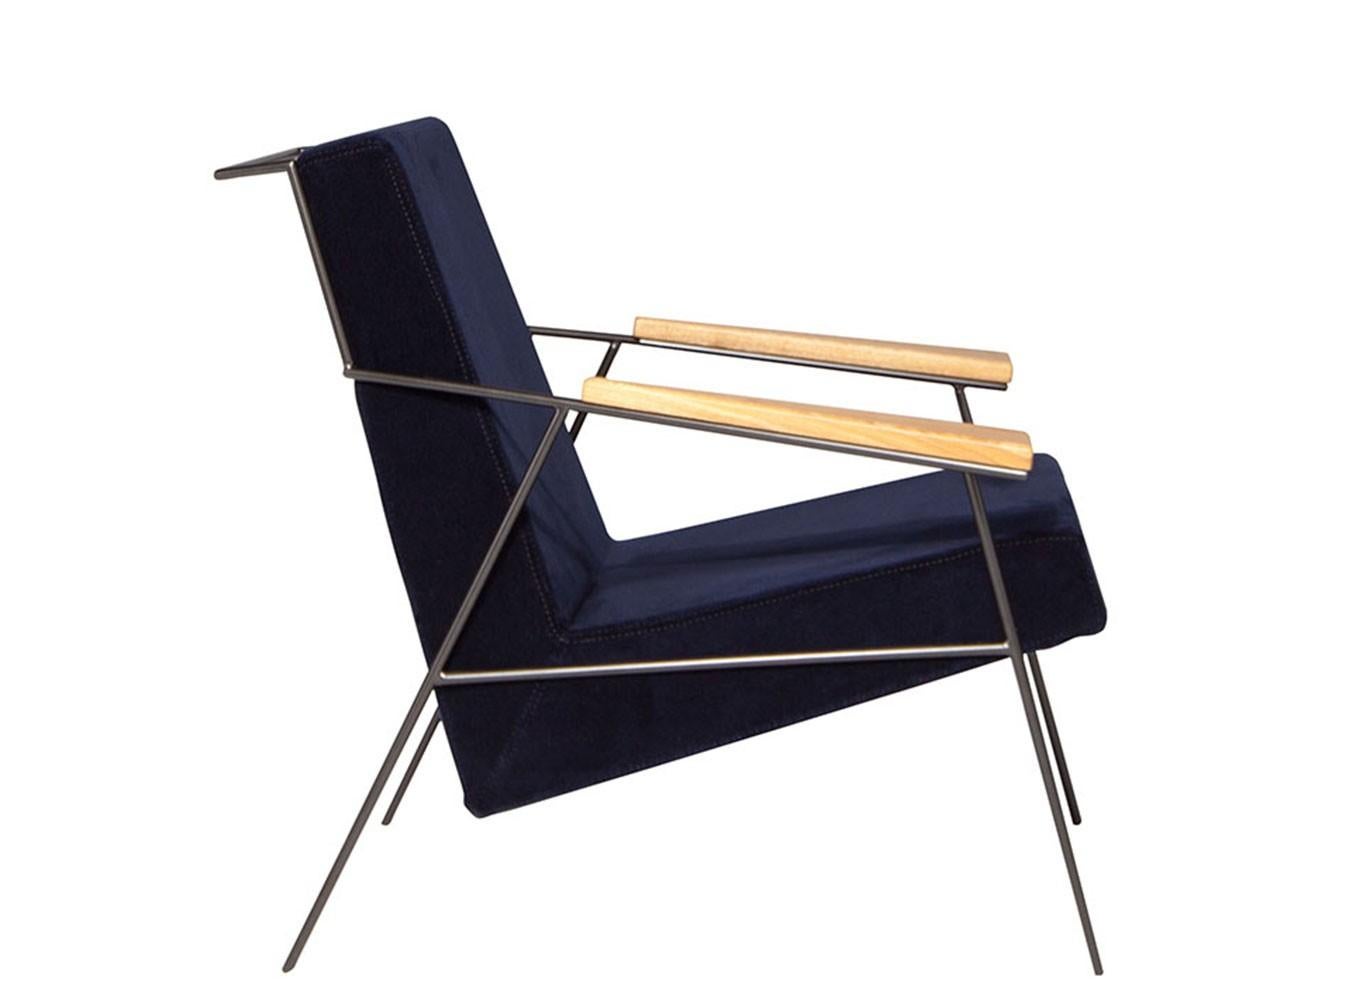 This simple and elegant contemporary armchair is made out of painted steel and may be upholstered in different options of fabric.

Zanini de Zanine was born in Rio de Janeiro, in 1978. There, he worked with Sergio Rodrigues and accompanied the work